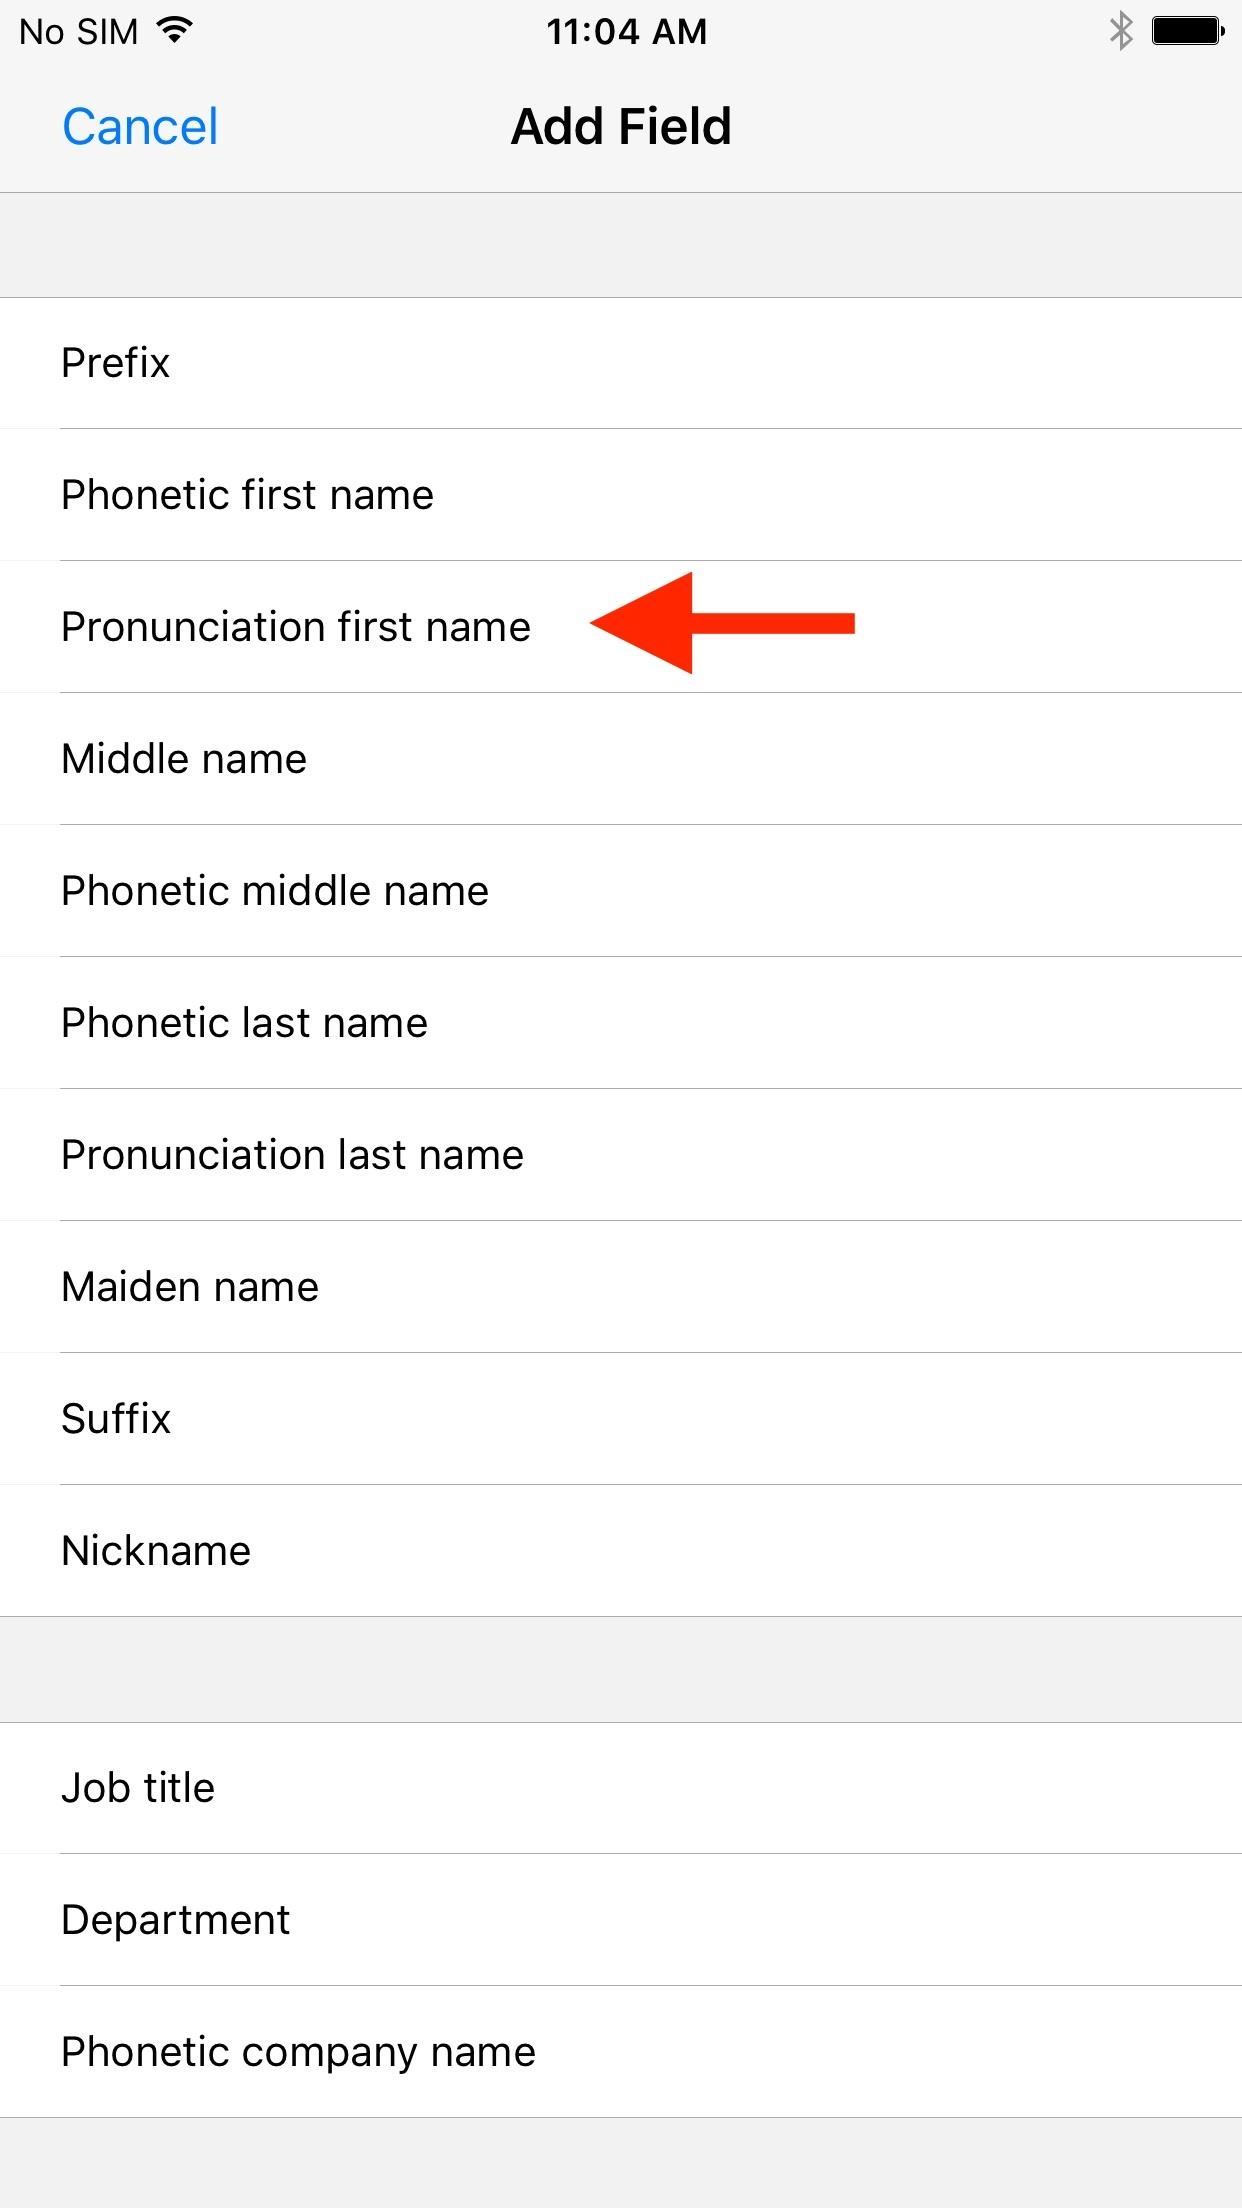 Siri 101: How to Make Siri Correctly Recognize & Pronounce Contact Names on Your iPhone